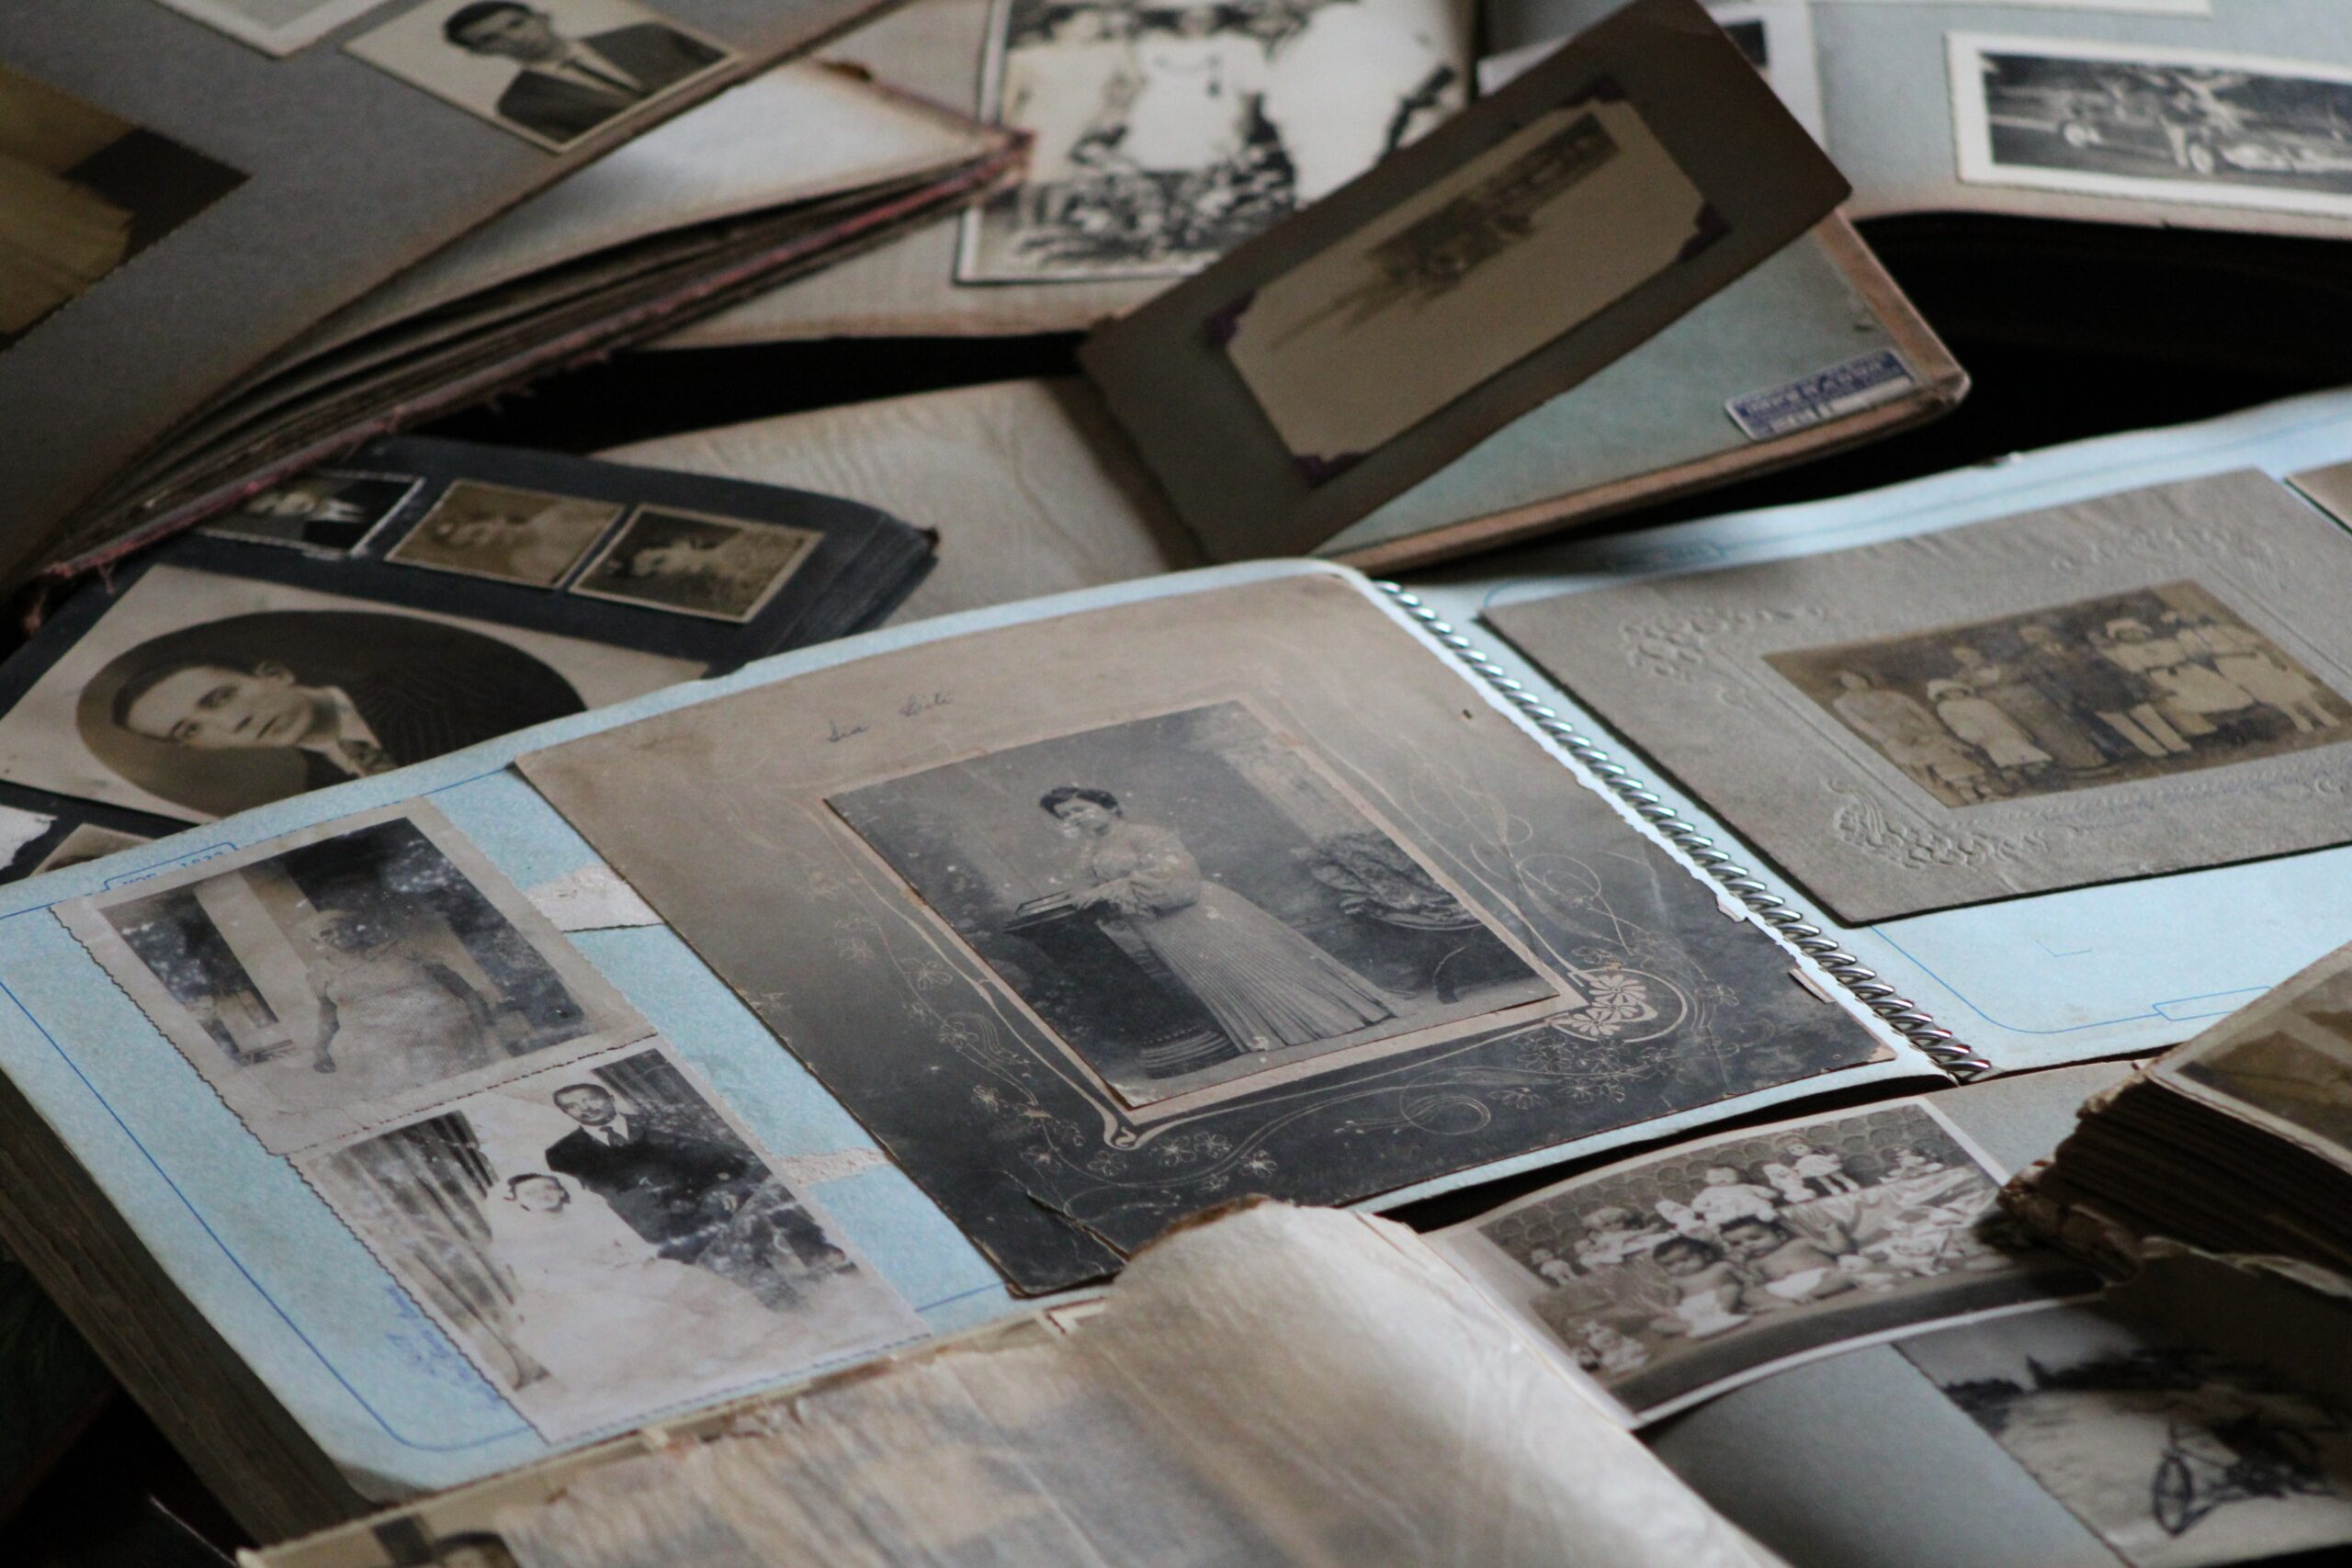 Photo Albums: Store Precious Pictures to Preserve Important